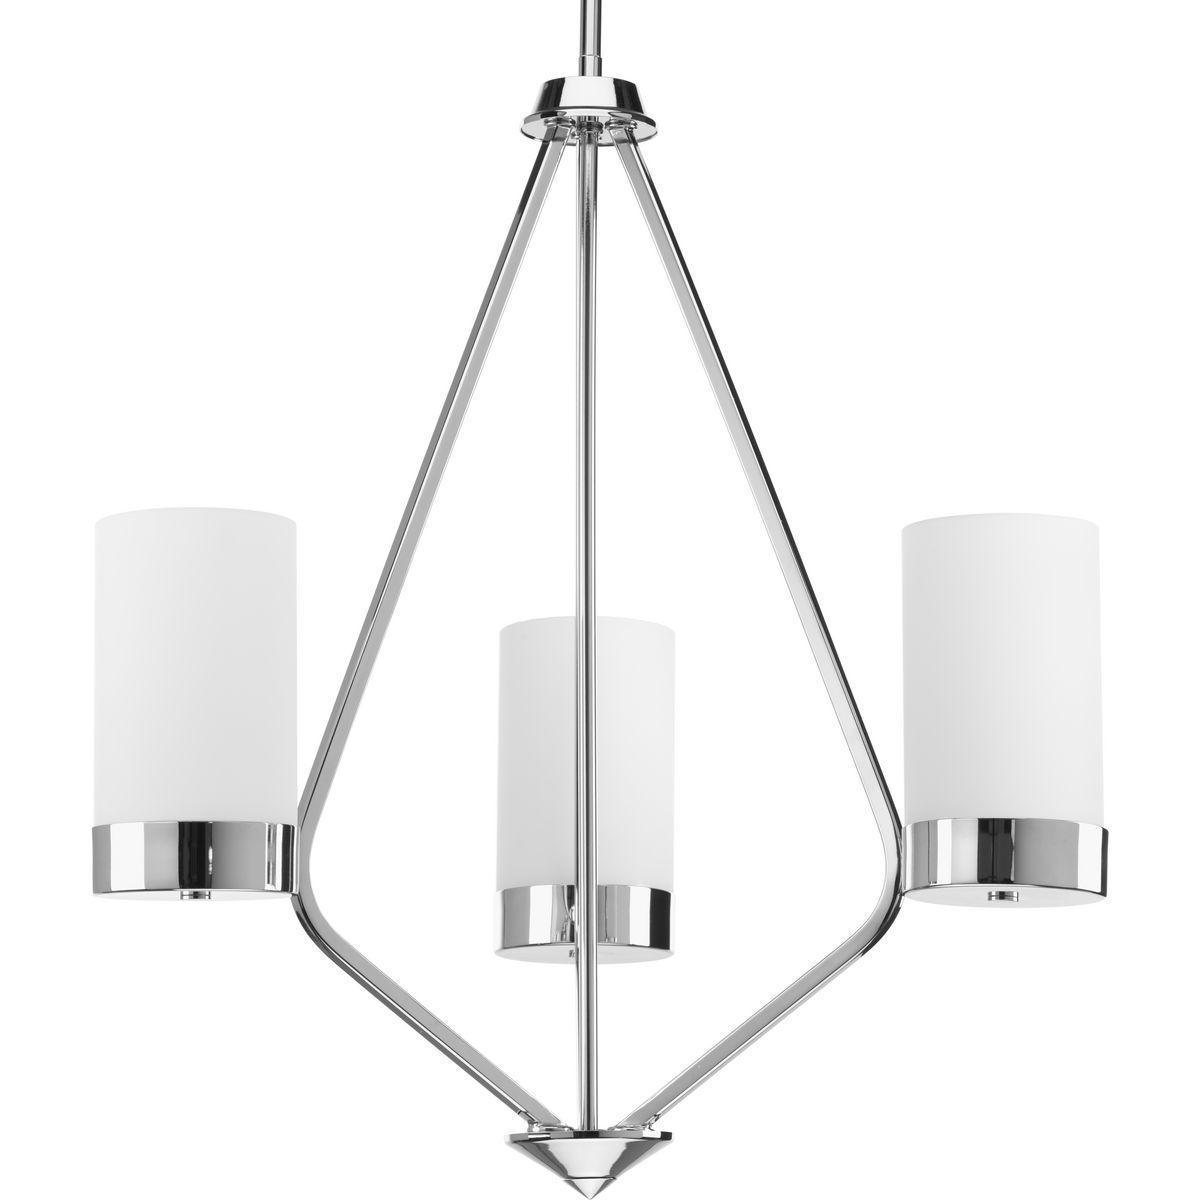 Hubbell P400021-015 Achieve a mid-century modern look with Elevate, which boasts glass shades and a frame inspired by Space Age styling. The trapezoidal form is accentuate in the Polished Chrome finish. This three-light chandelier is part of our Design Series collections.  ;